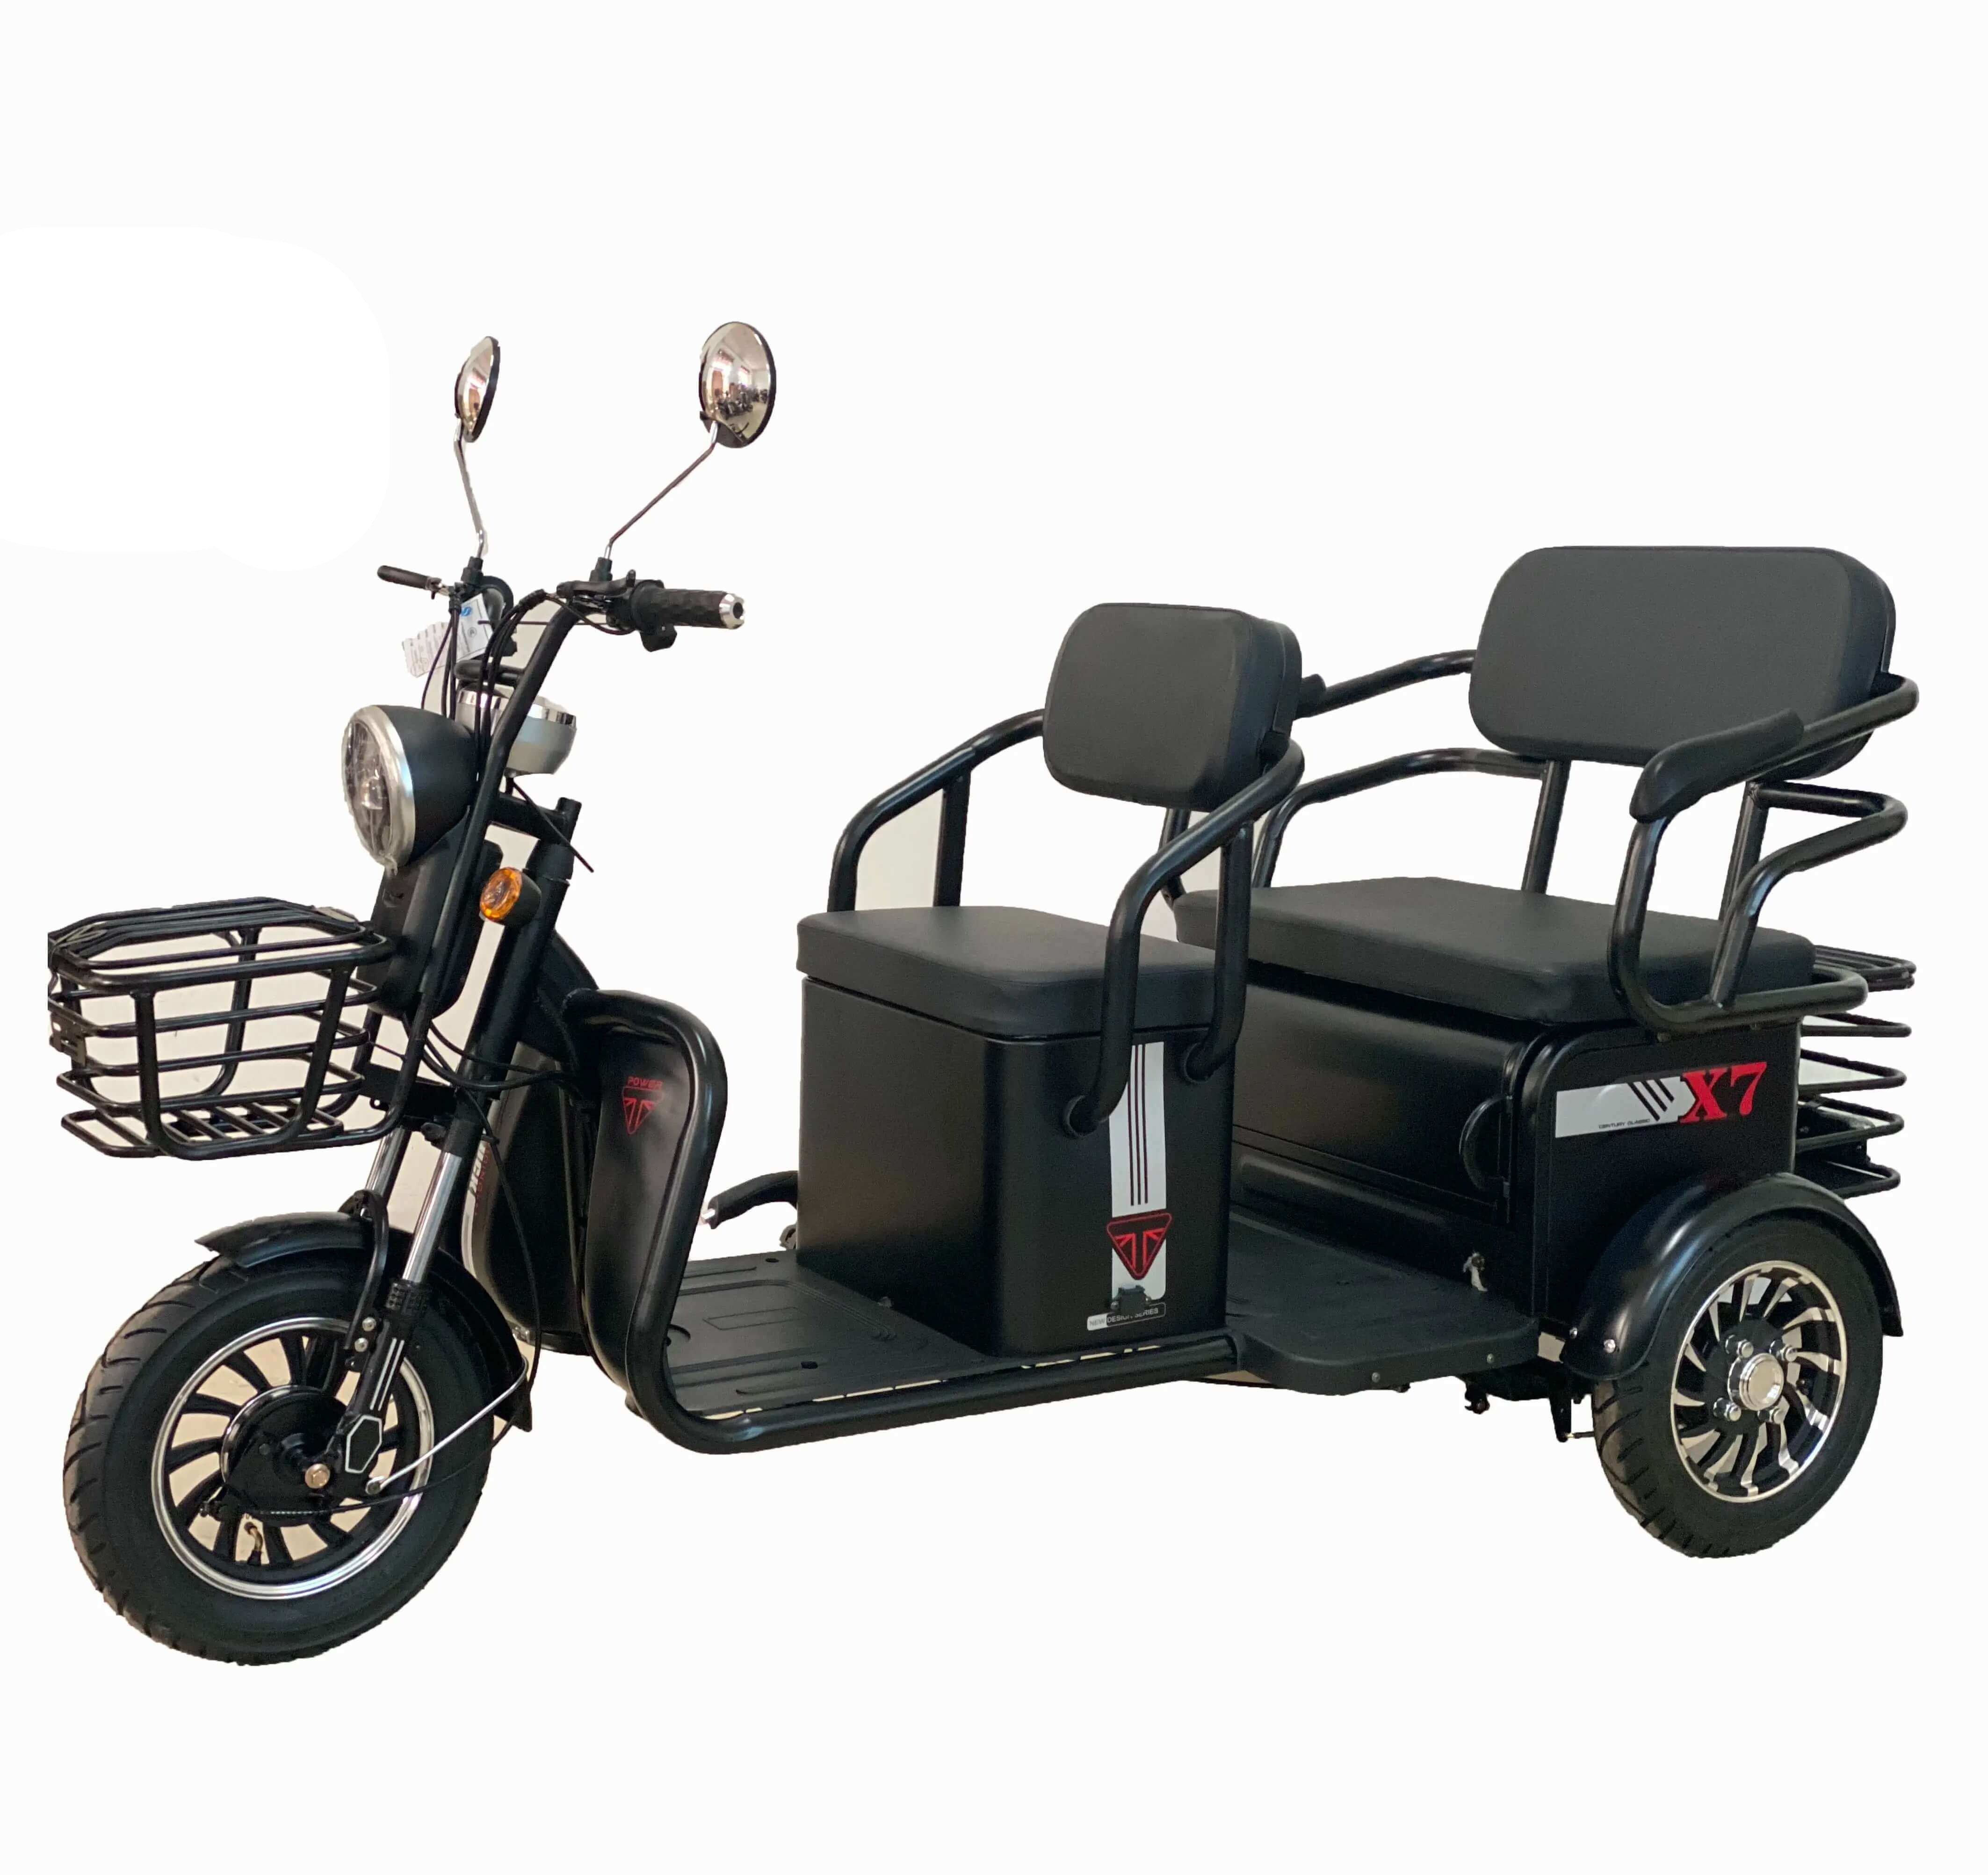 Megawheels Mobility 3 Wheel 3 passenger Electric Tricycle Scooter- black